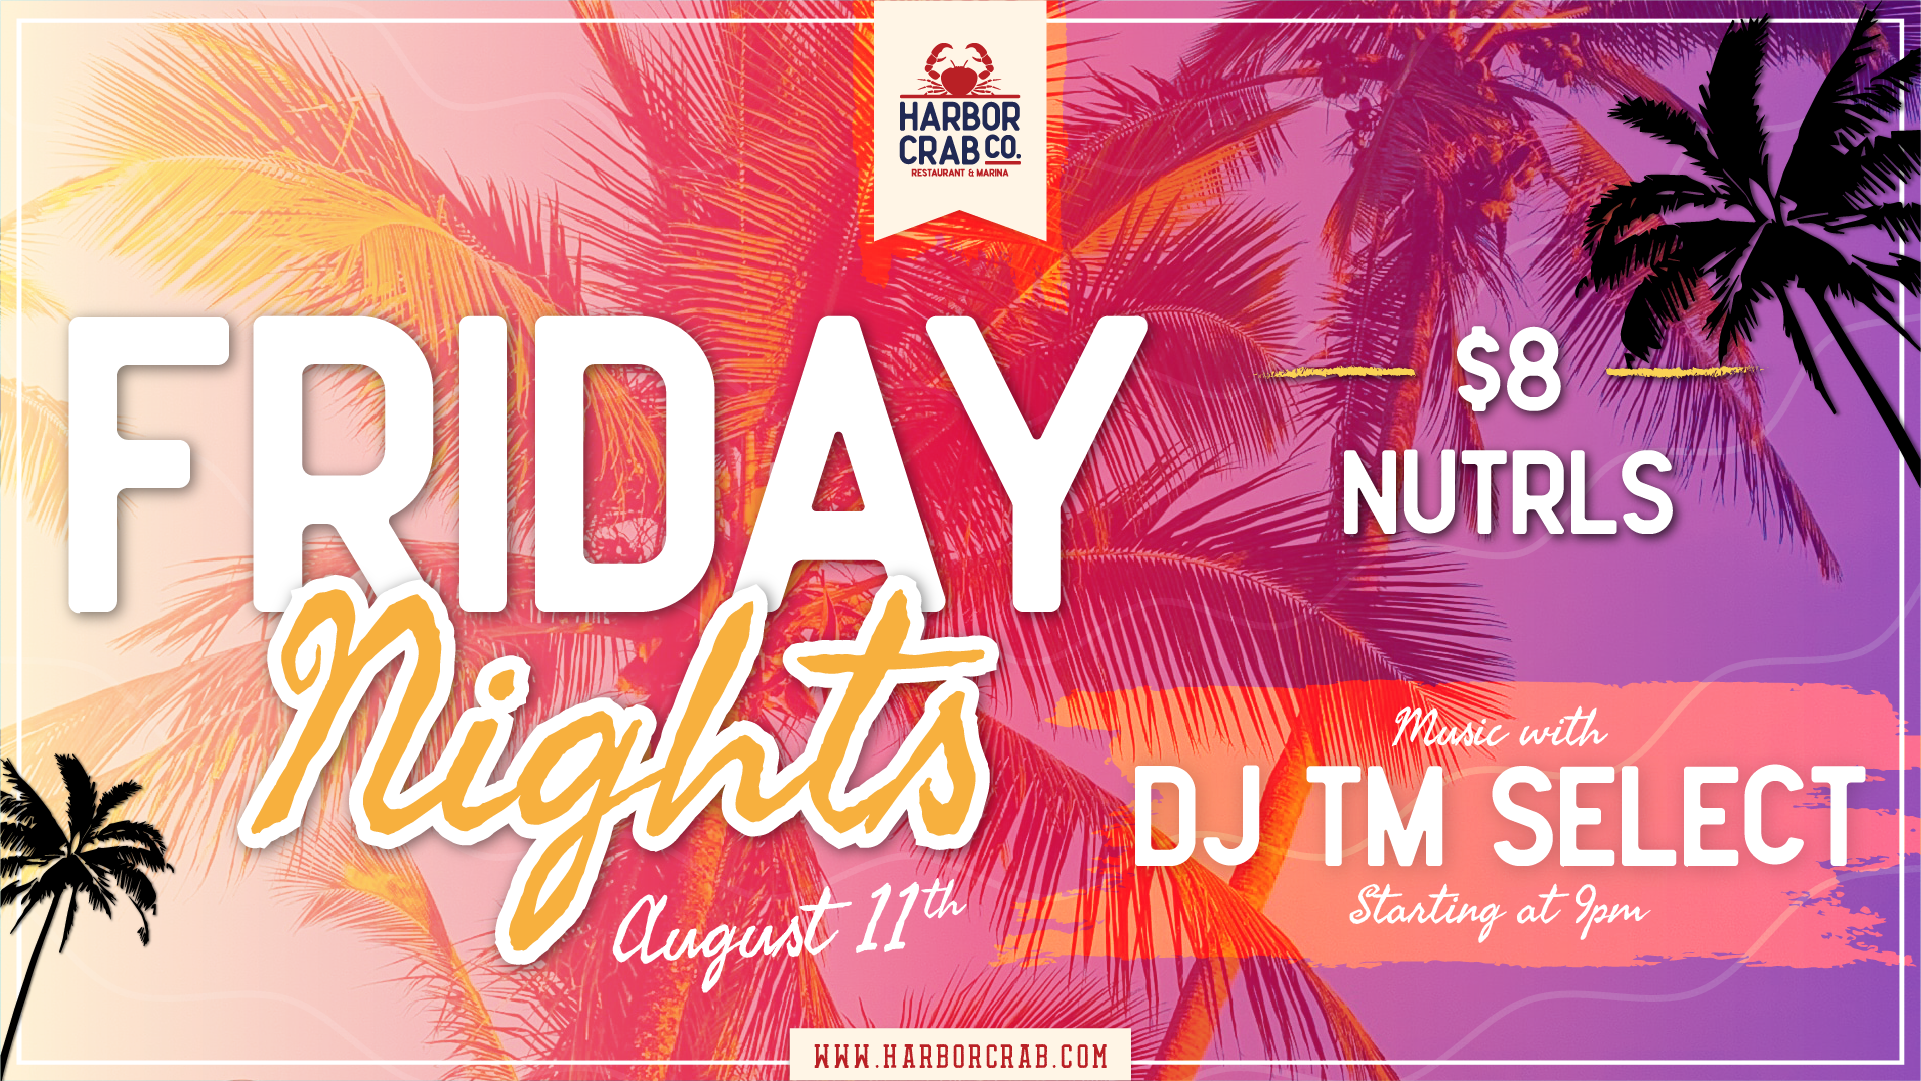 Friday Night with DJ TM Select on August 11th at 9:00pm